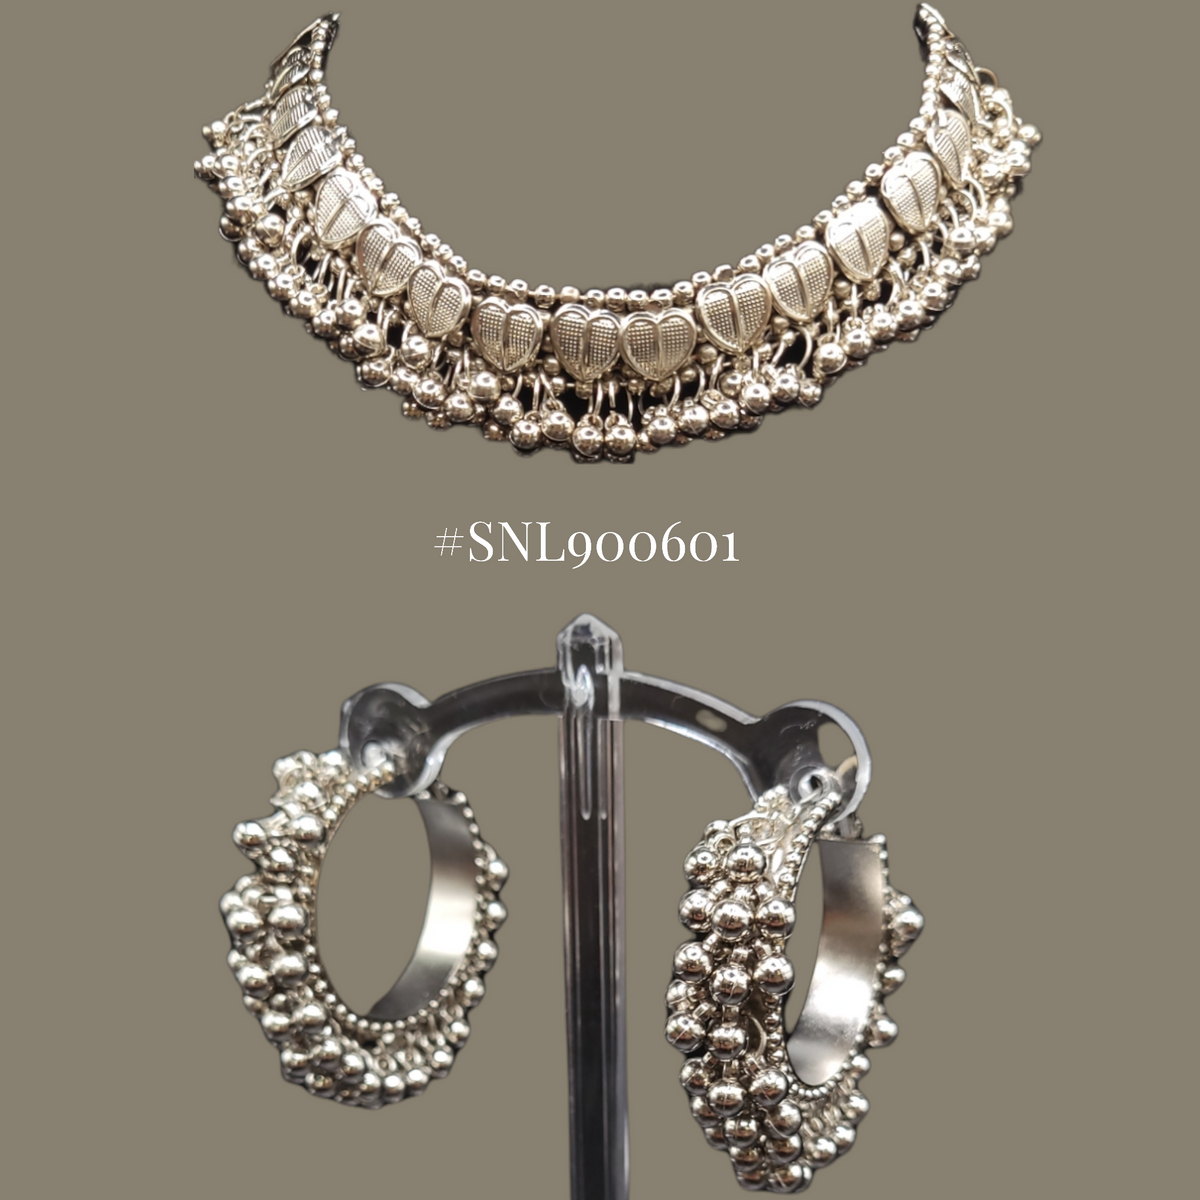 DESIGNER CHOKER NECKLACE WITH EARRINGS SET